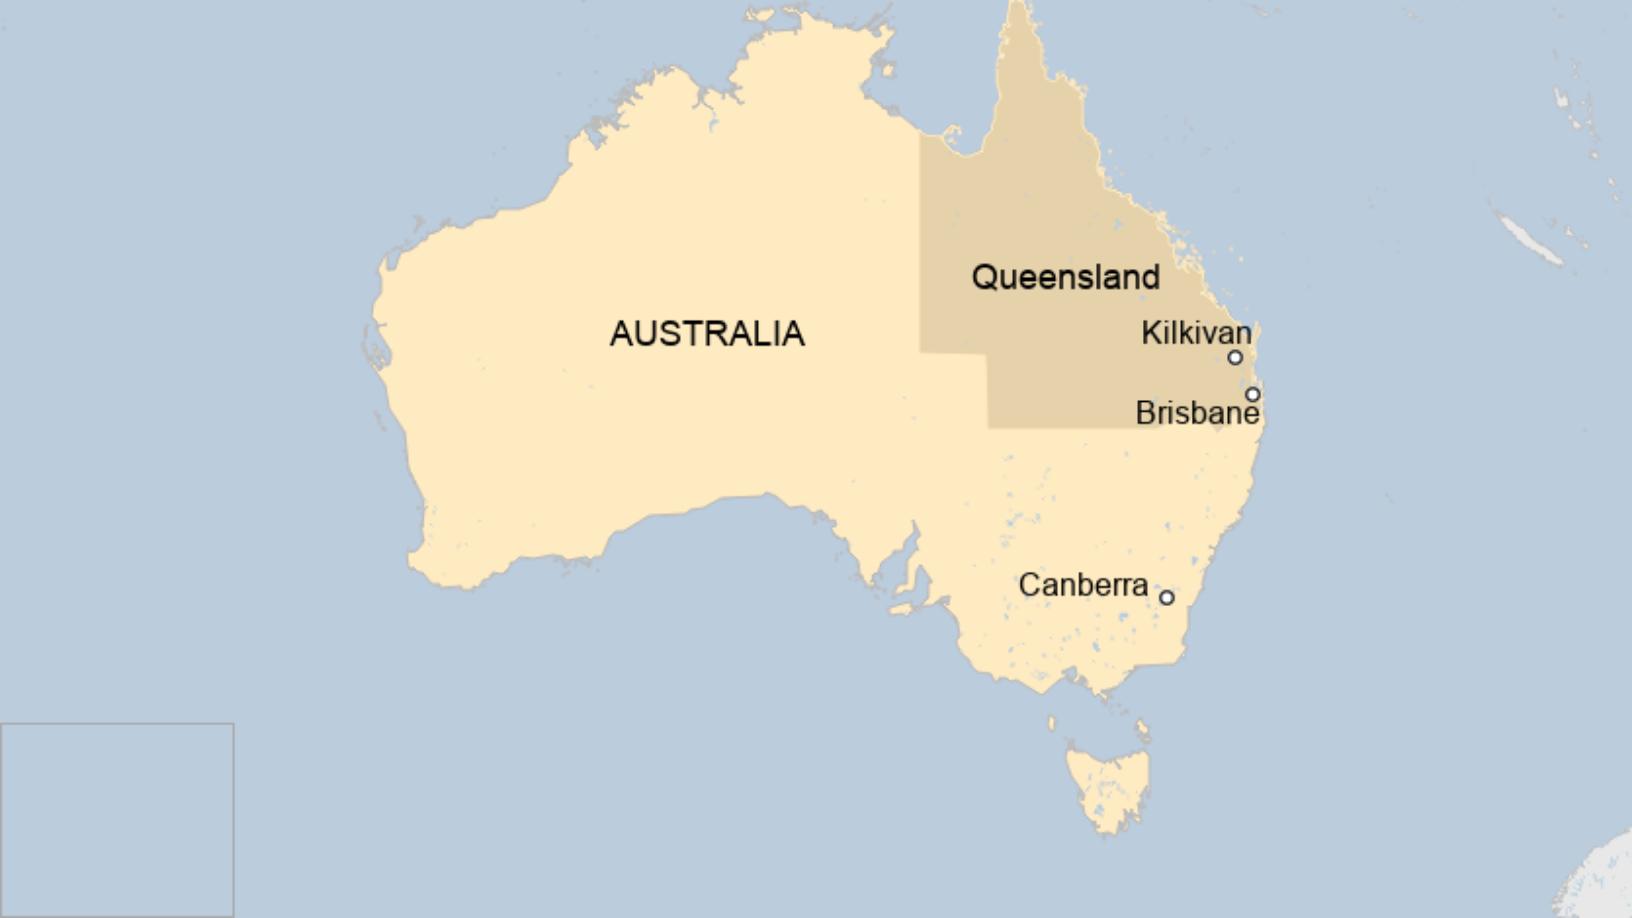 Map: A map of Australia, showing Queensland and the town of Kilkivan